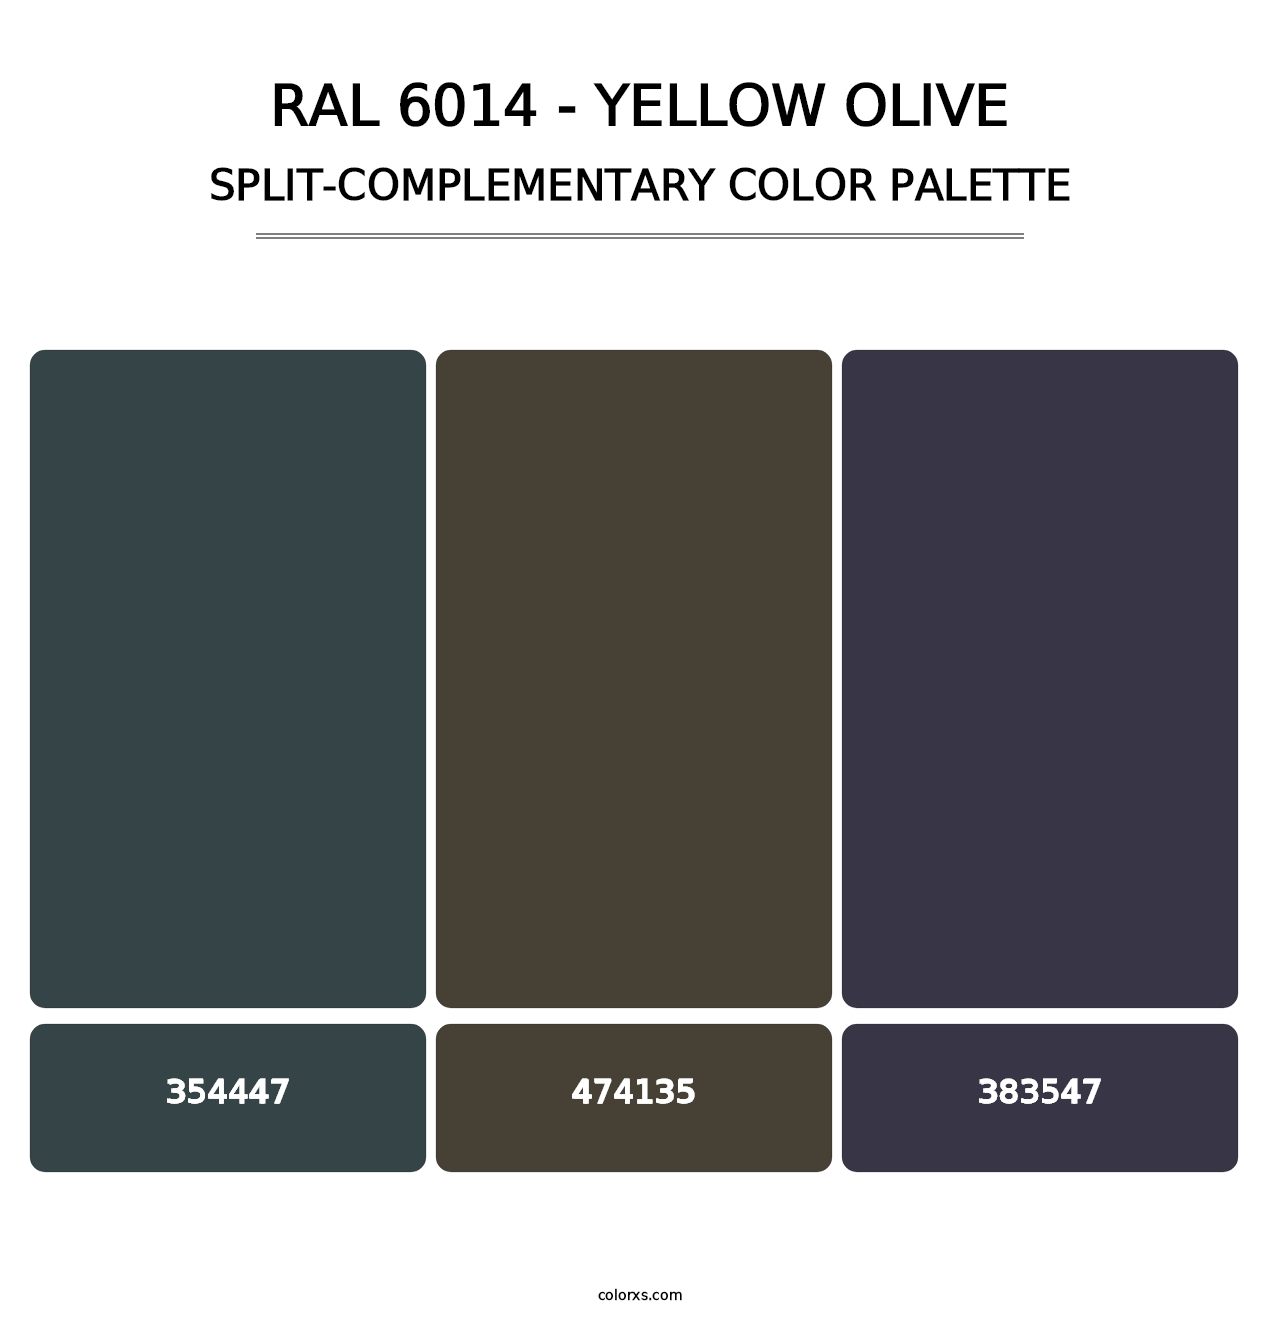 RAL 6014 - Yellow Olive - Split-Complementary Color Palette